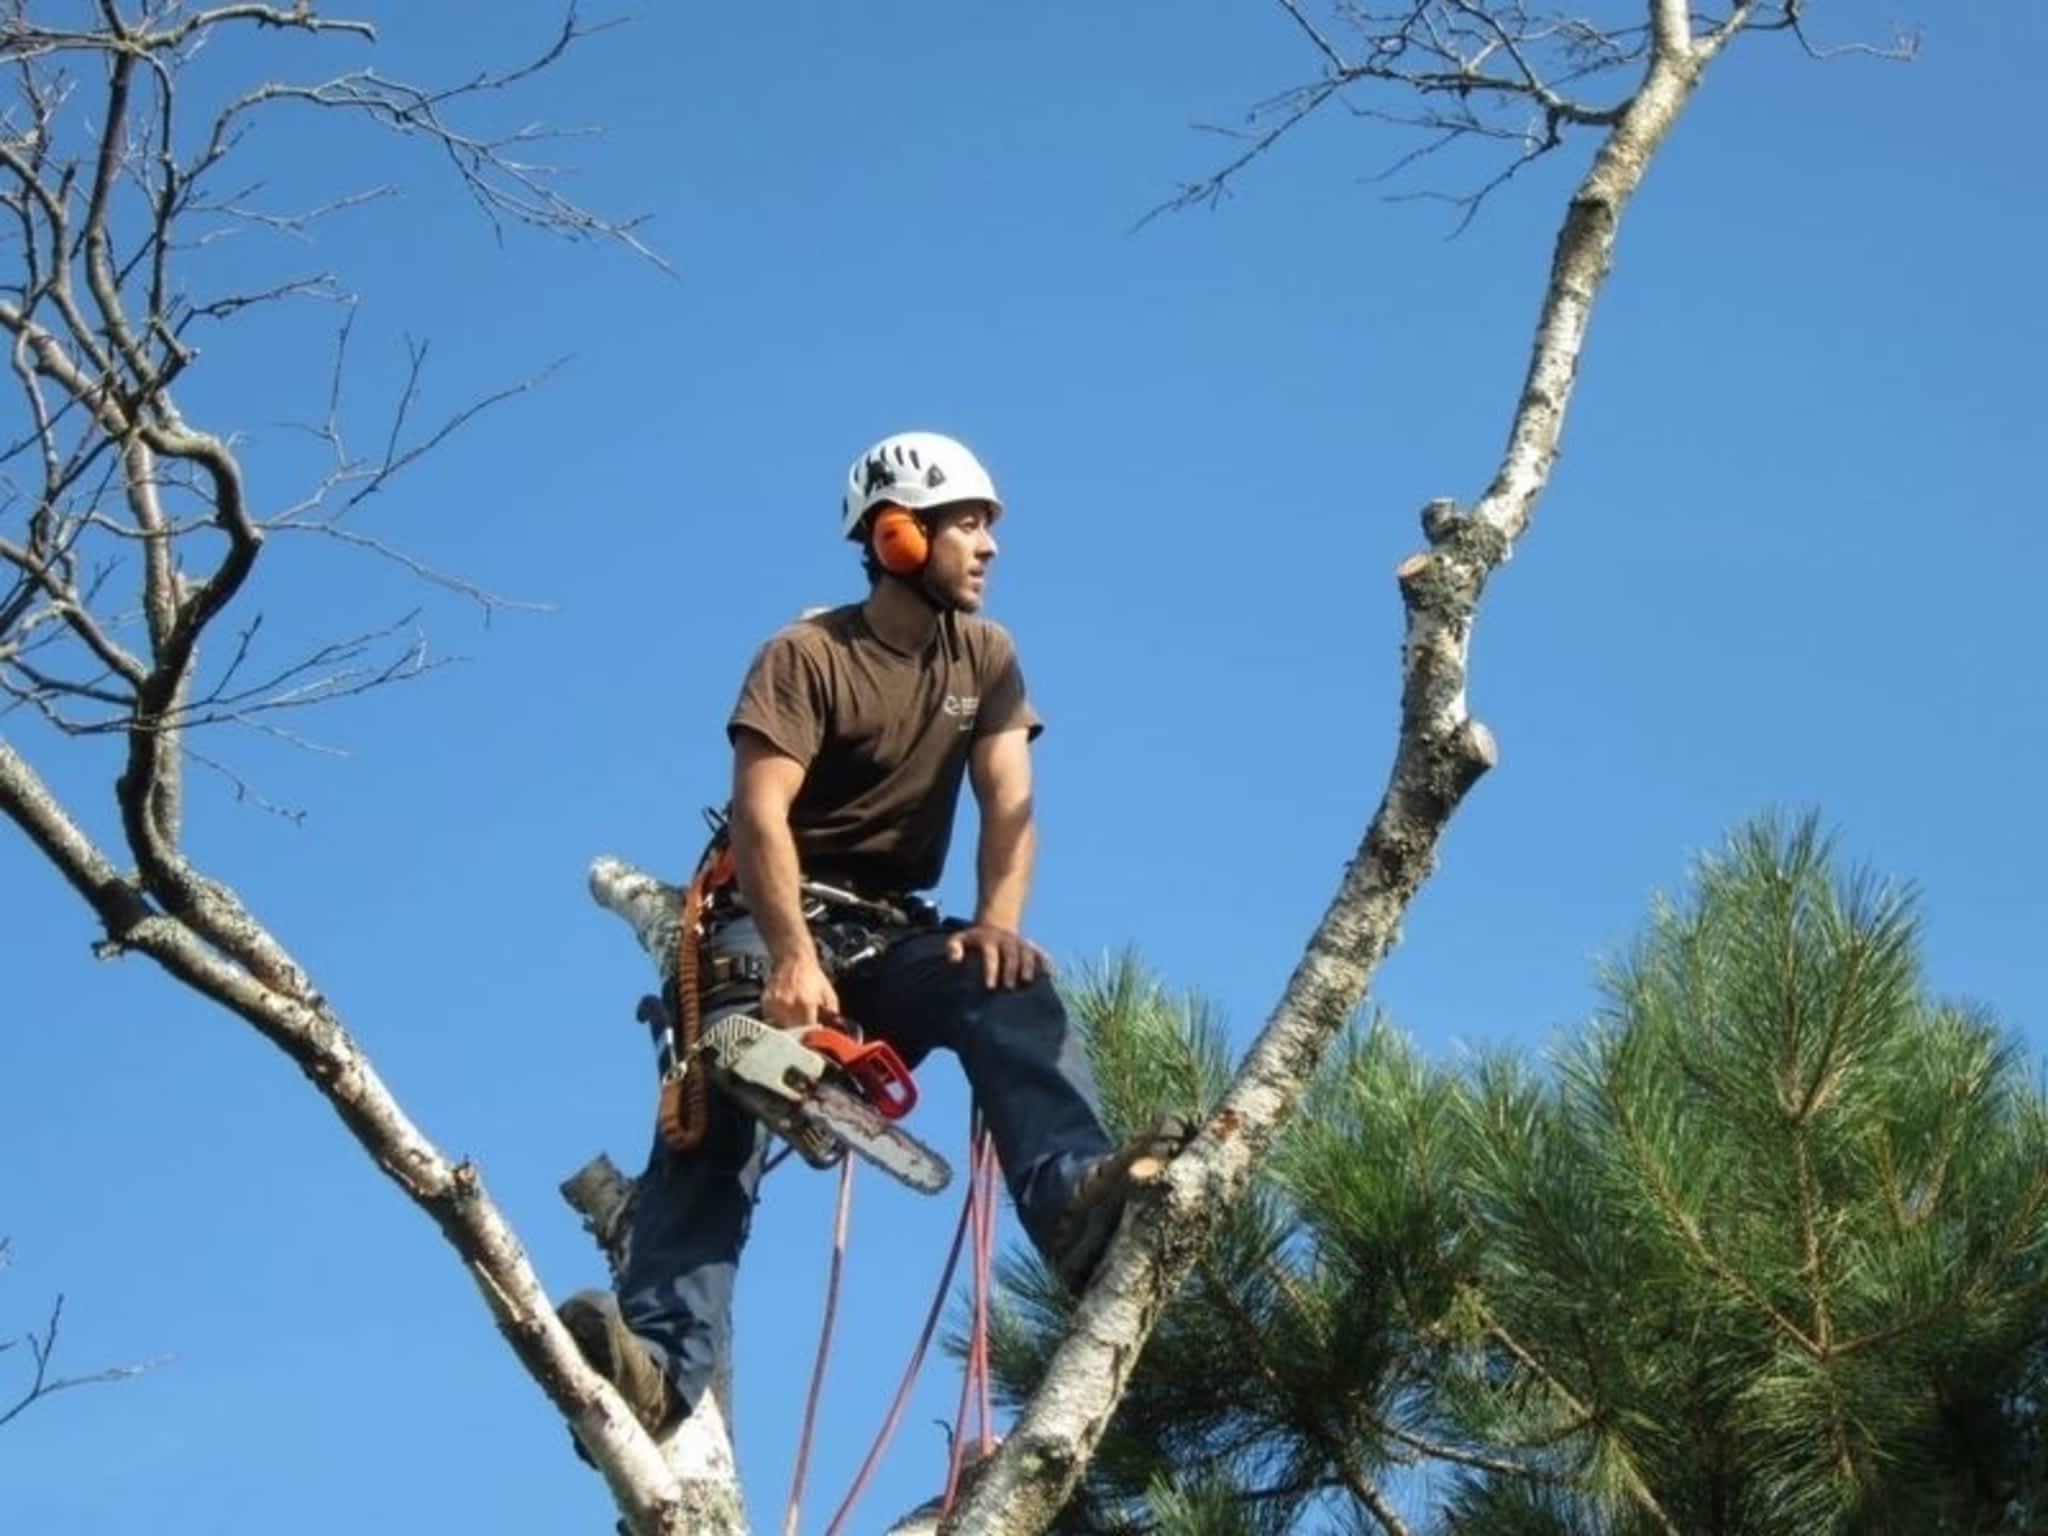 photo Ground to Crown Tree Services